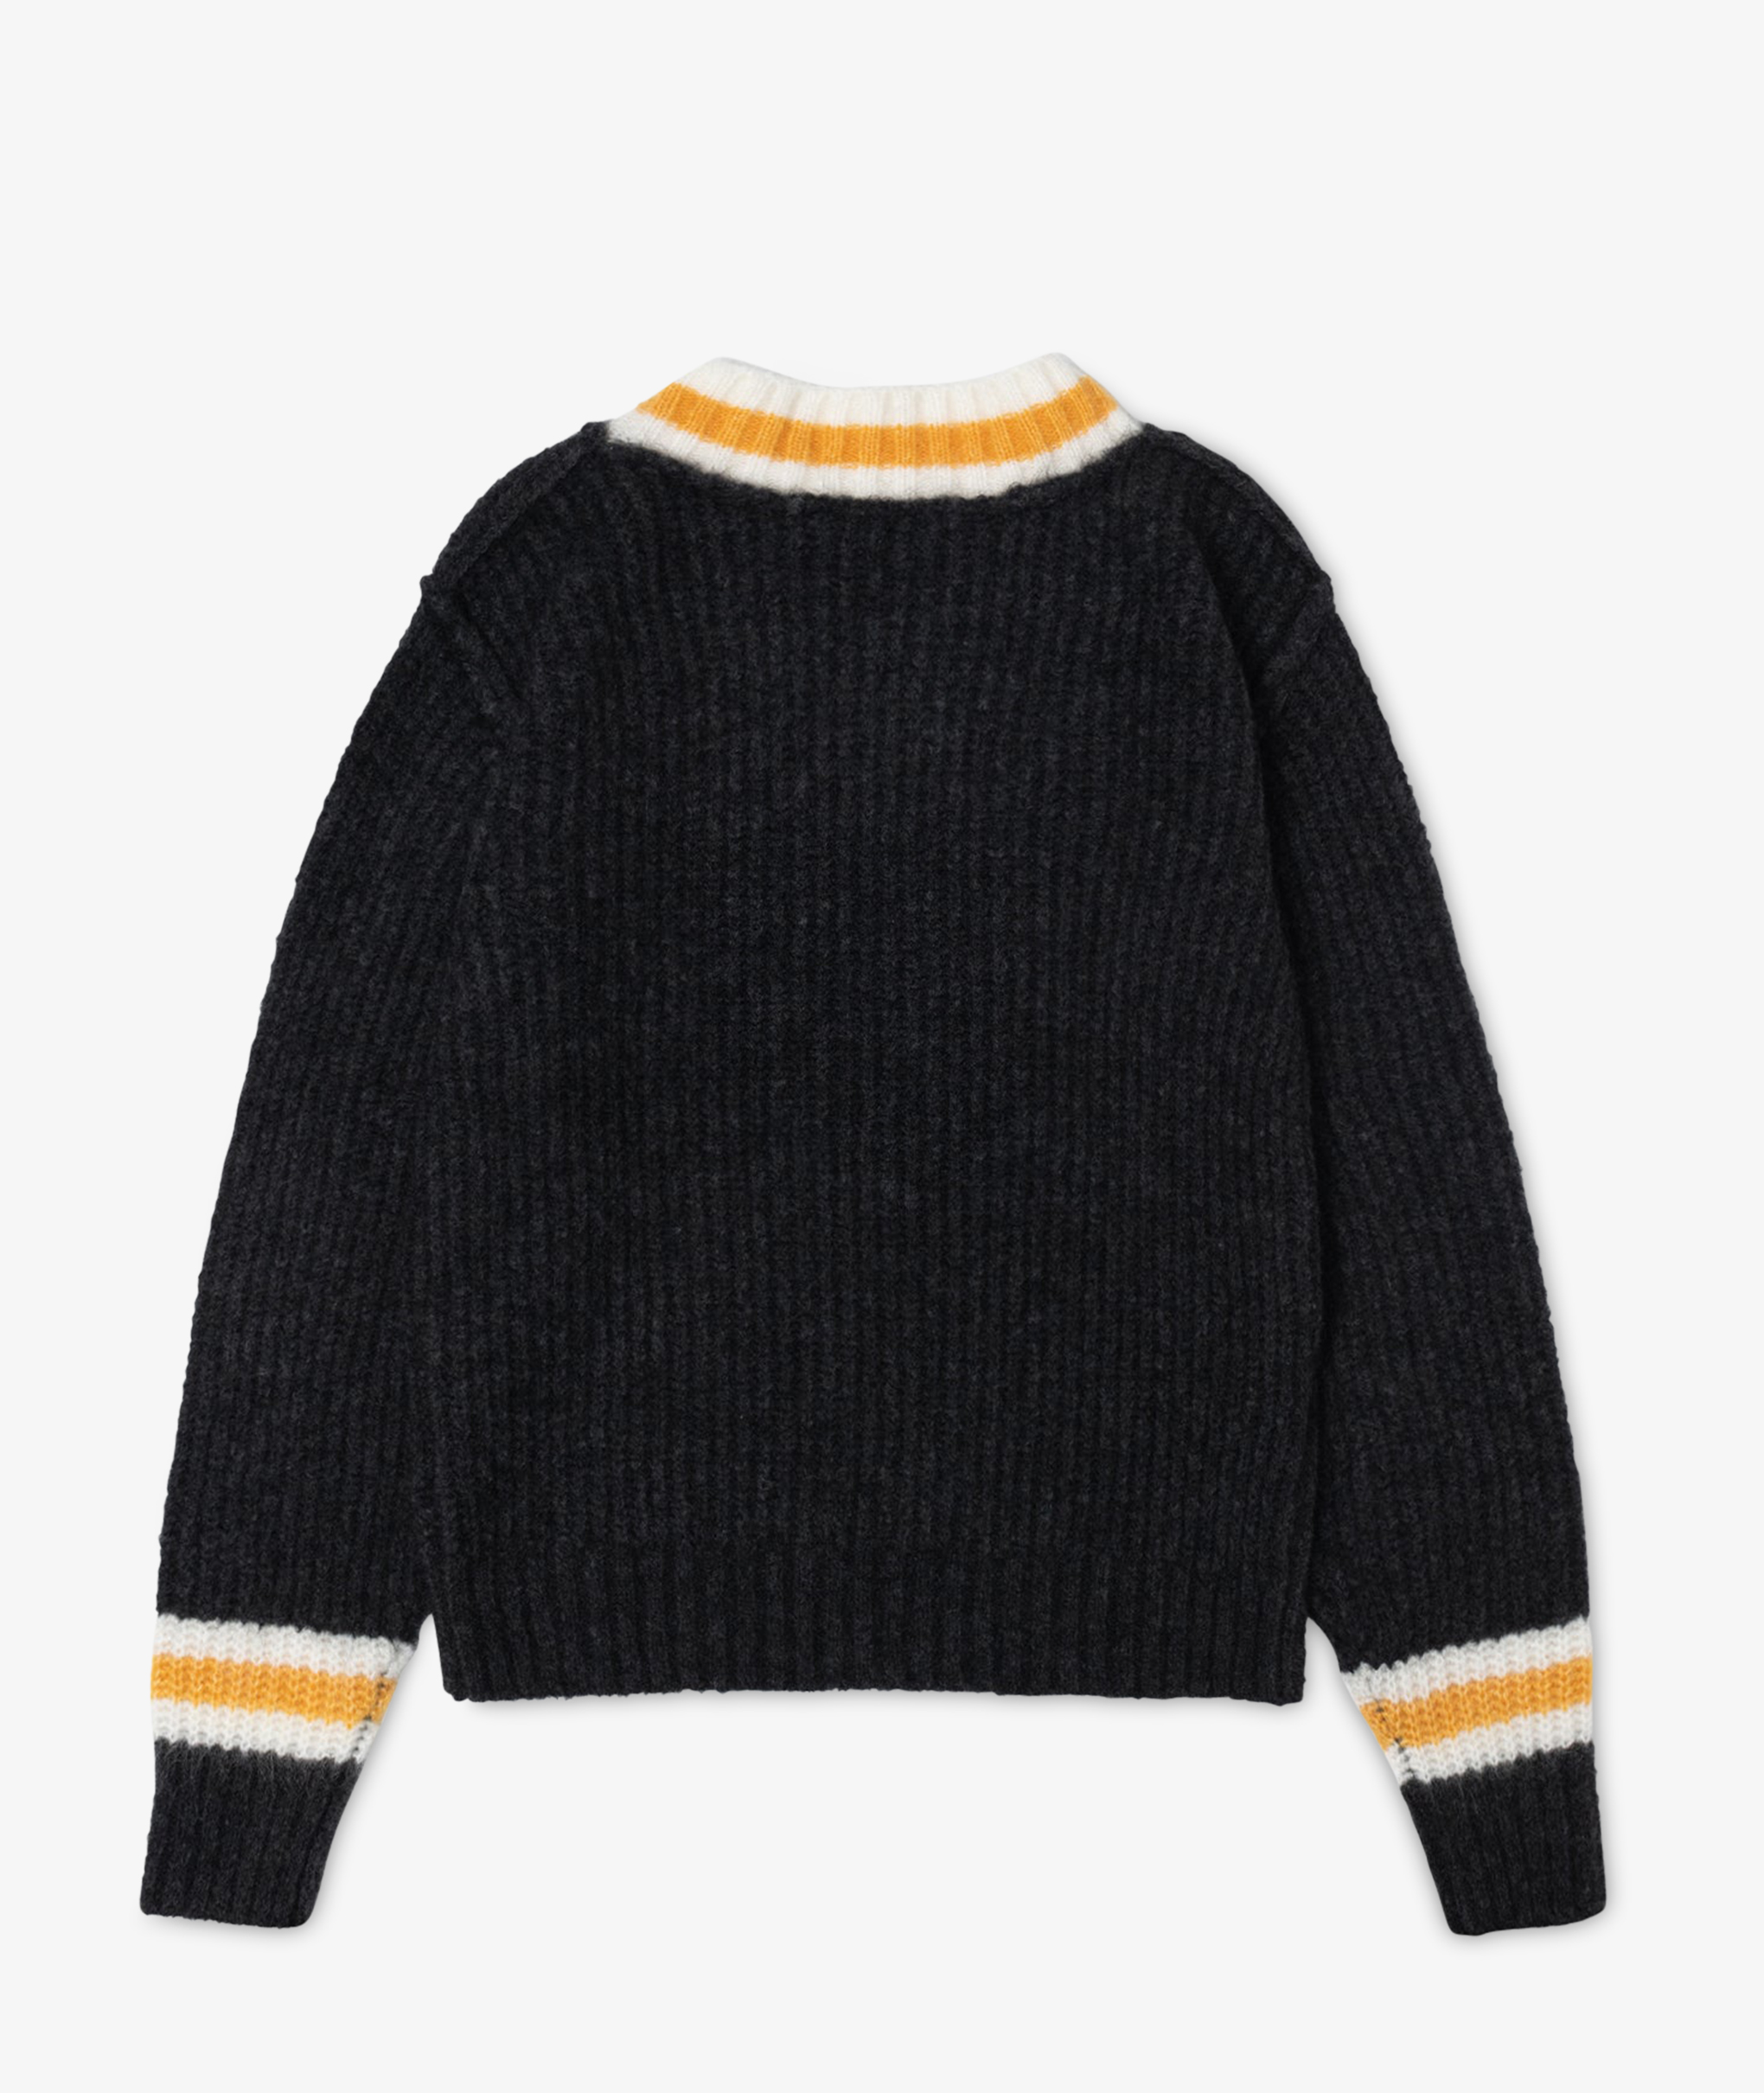 Norse Store | Shipping Worldwide - Stüssy Mohair Tennis Sweater - Charcoal